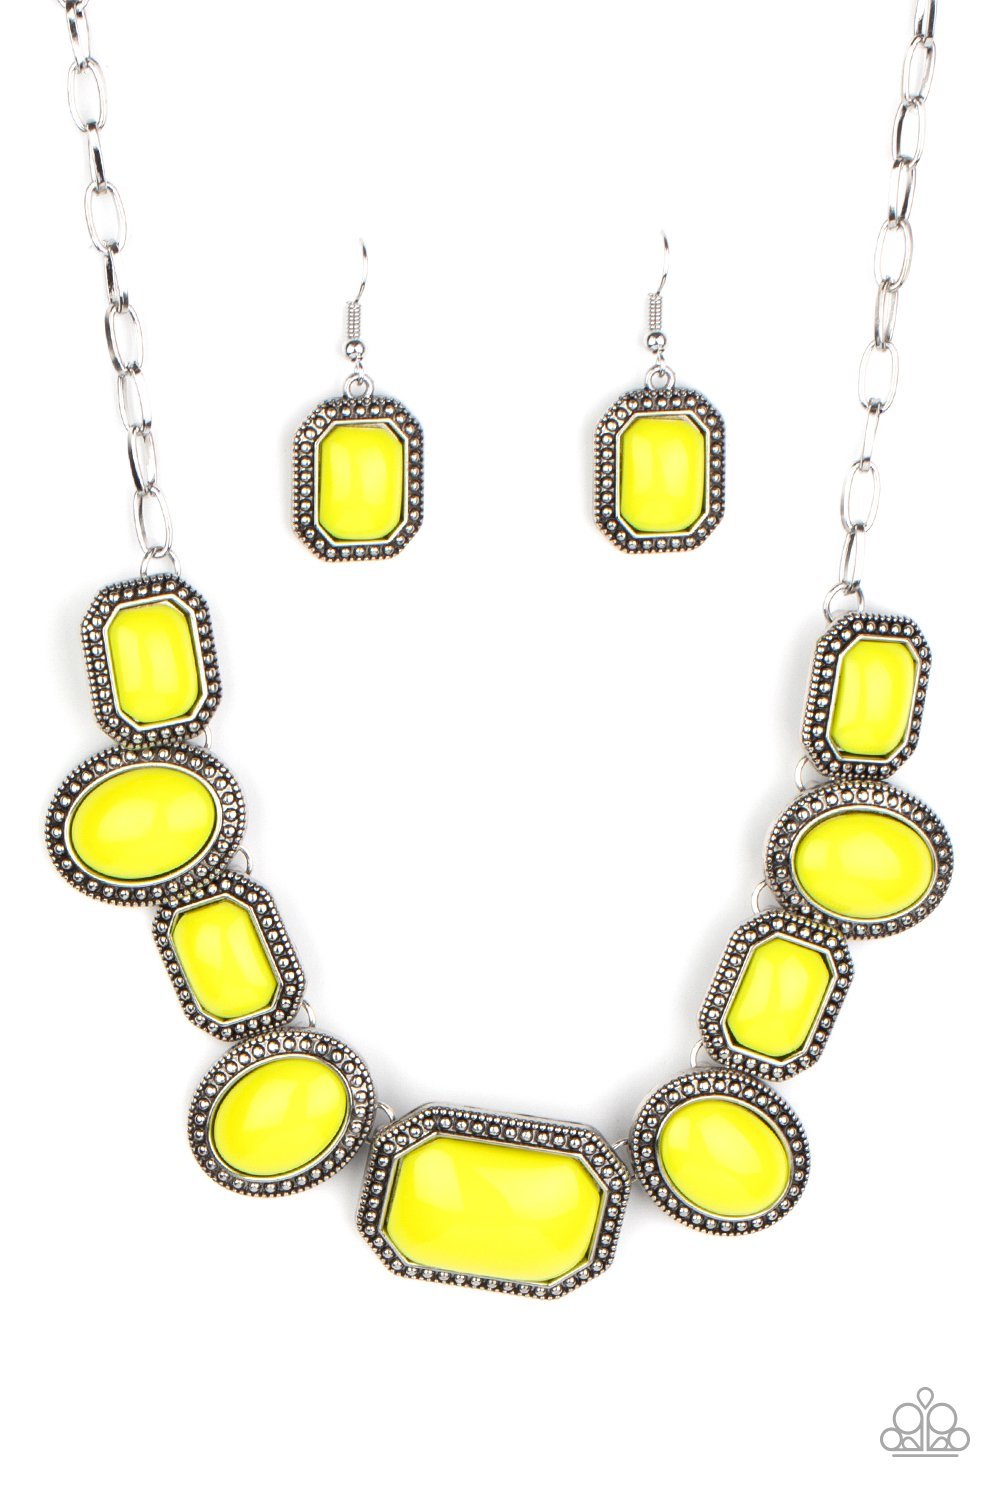 "Let's Get Loud" - Yellow #422- Paparazzi Accessories